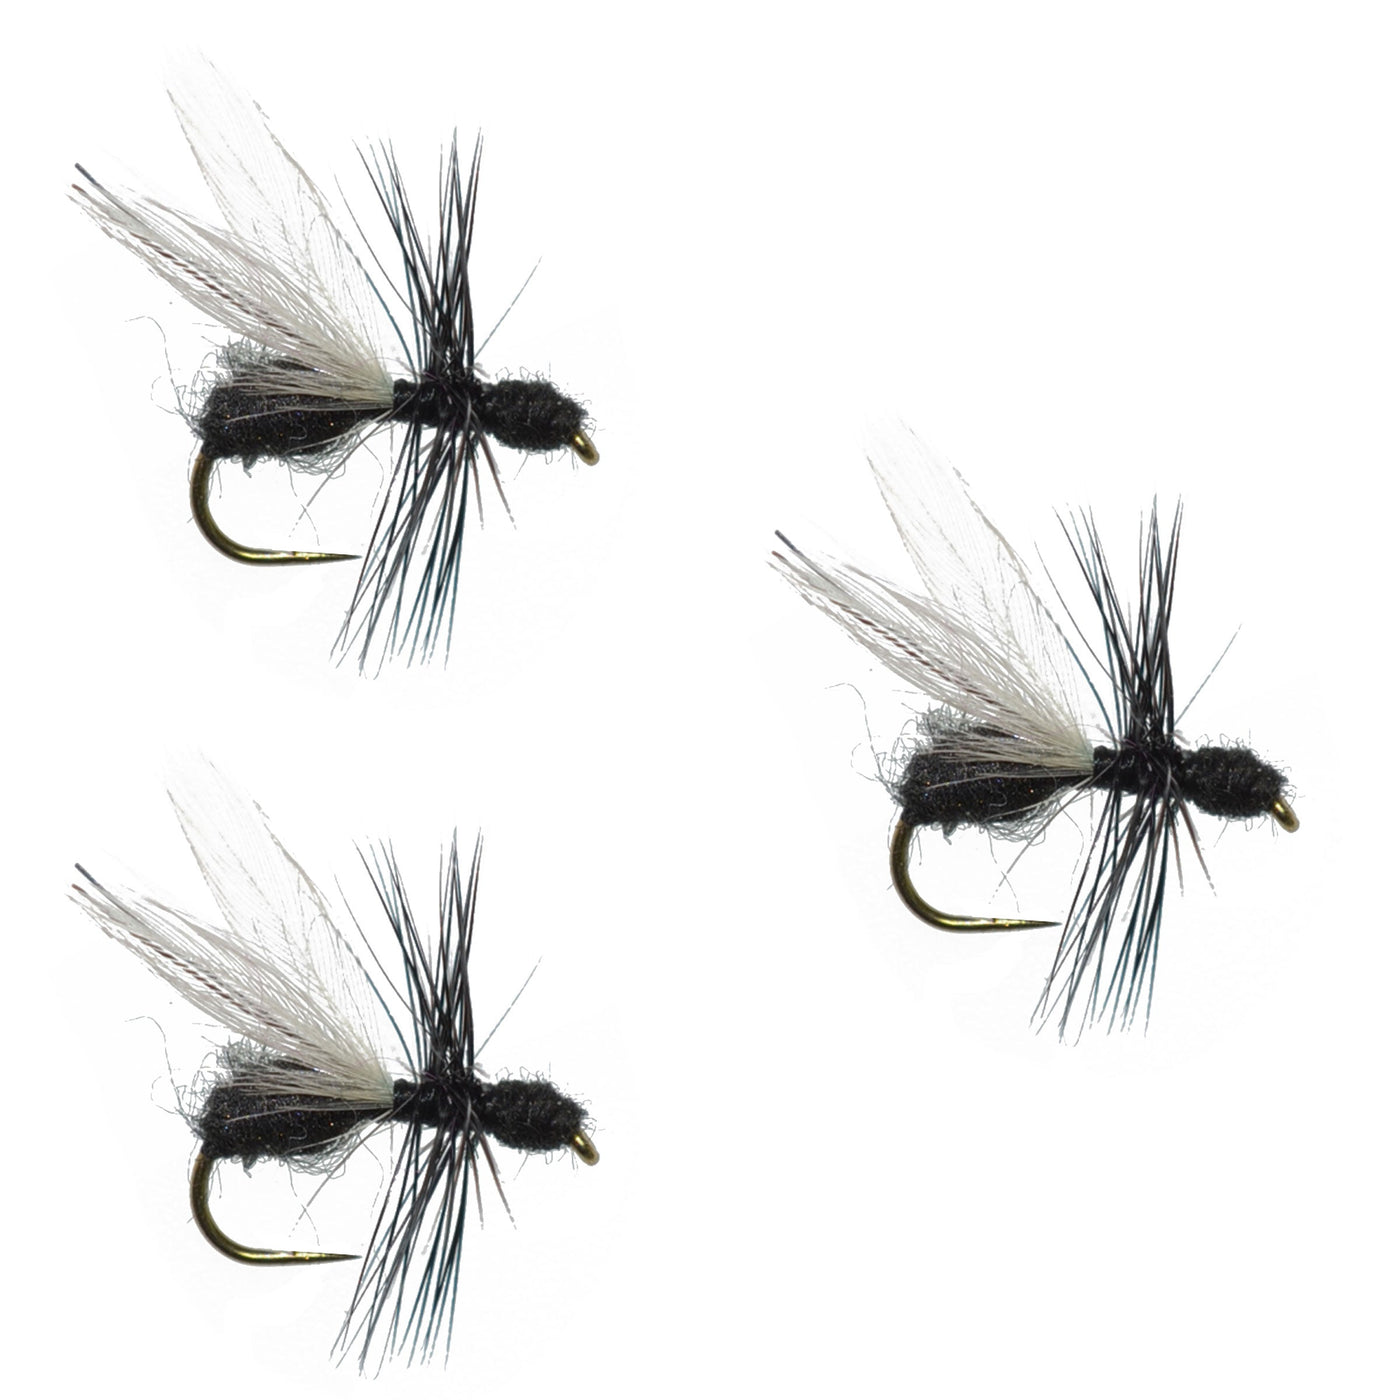 3 Pack Barbless Black Fur Flying Ant Terrestrial Trout Dry Fly Fishing Flies - Hook Size 14